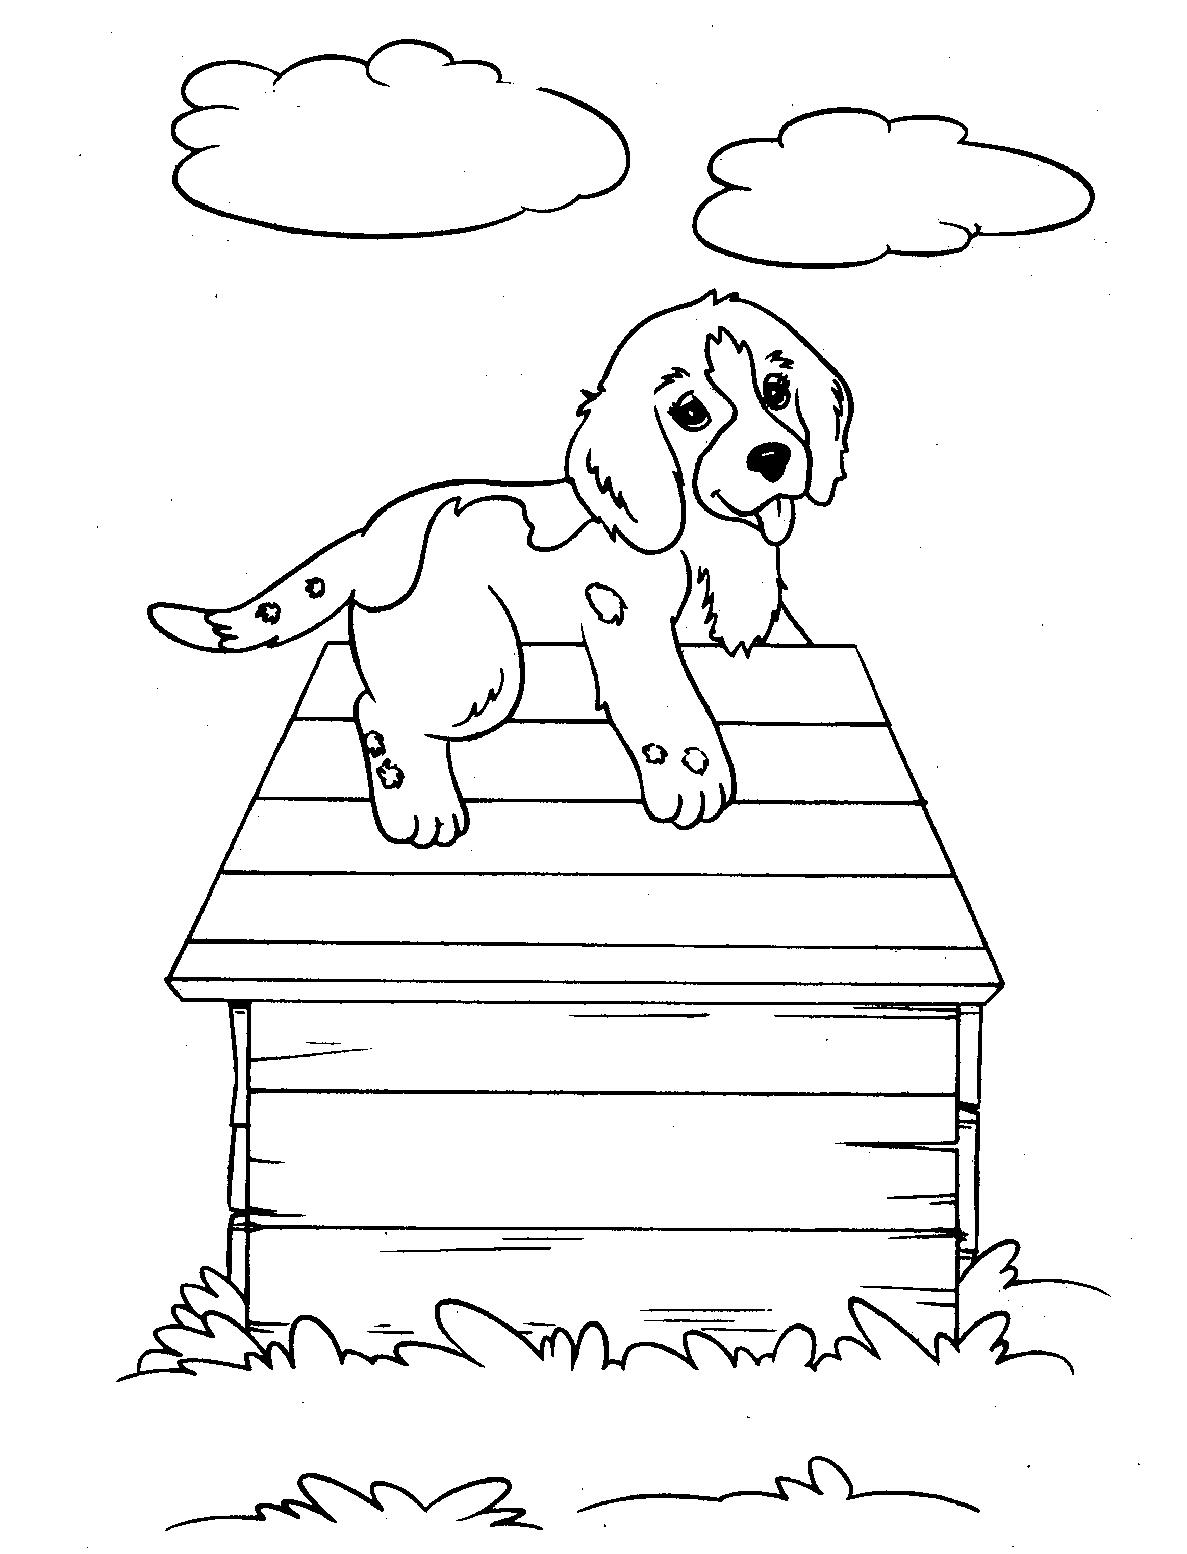 Puppy-Dog-Coloring-Page